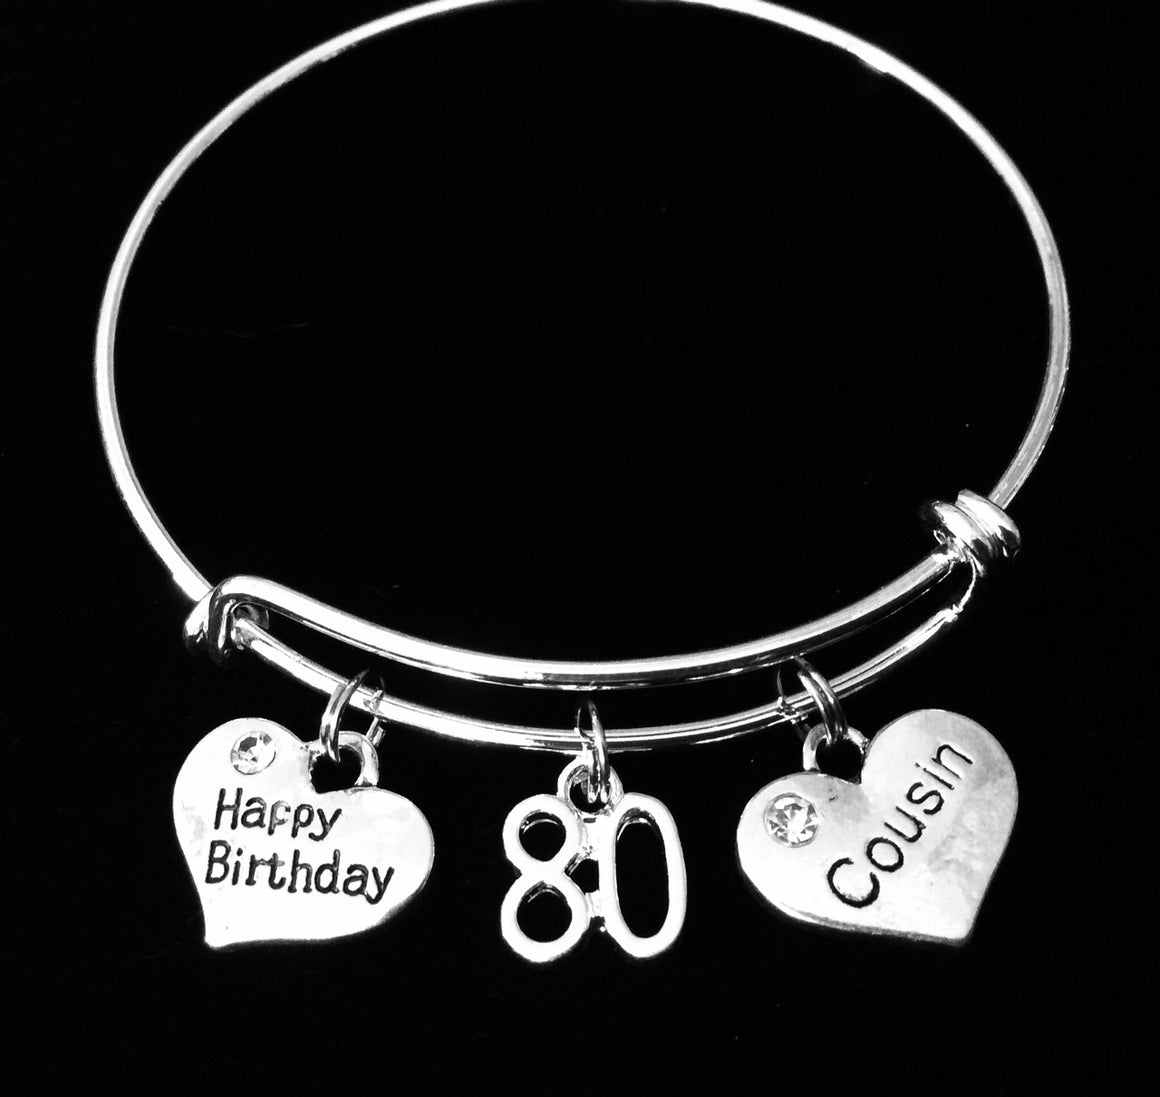 Cousin Birthday Gift for 80th Birthday Happy Birthday 80 Expandable Charm Bracelets Adjustable Bangle One Size Fits All